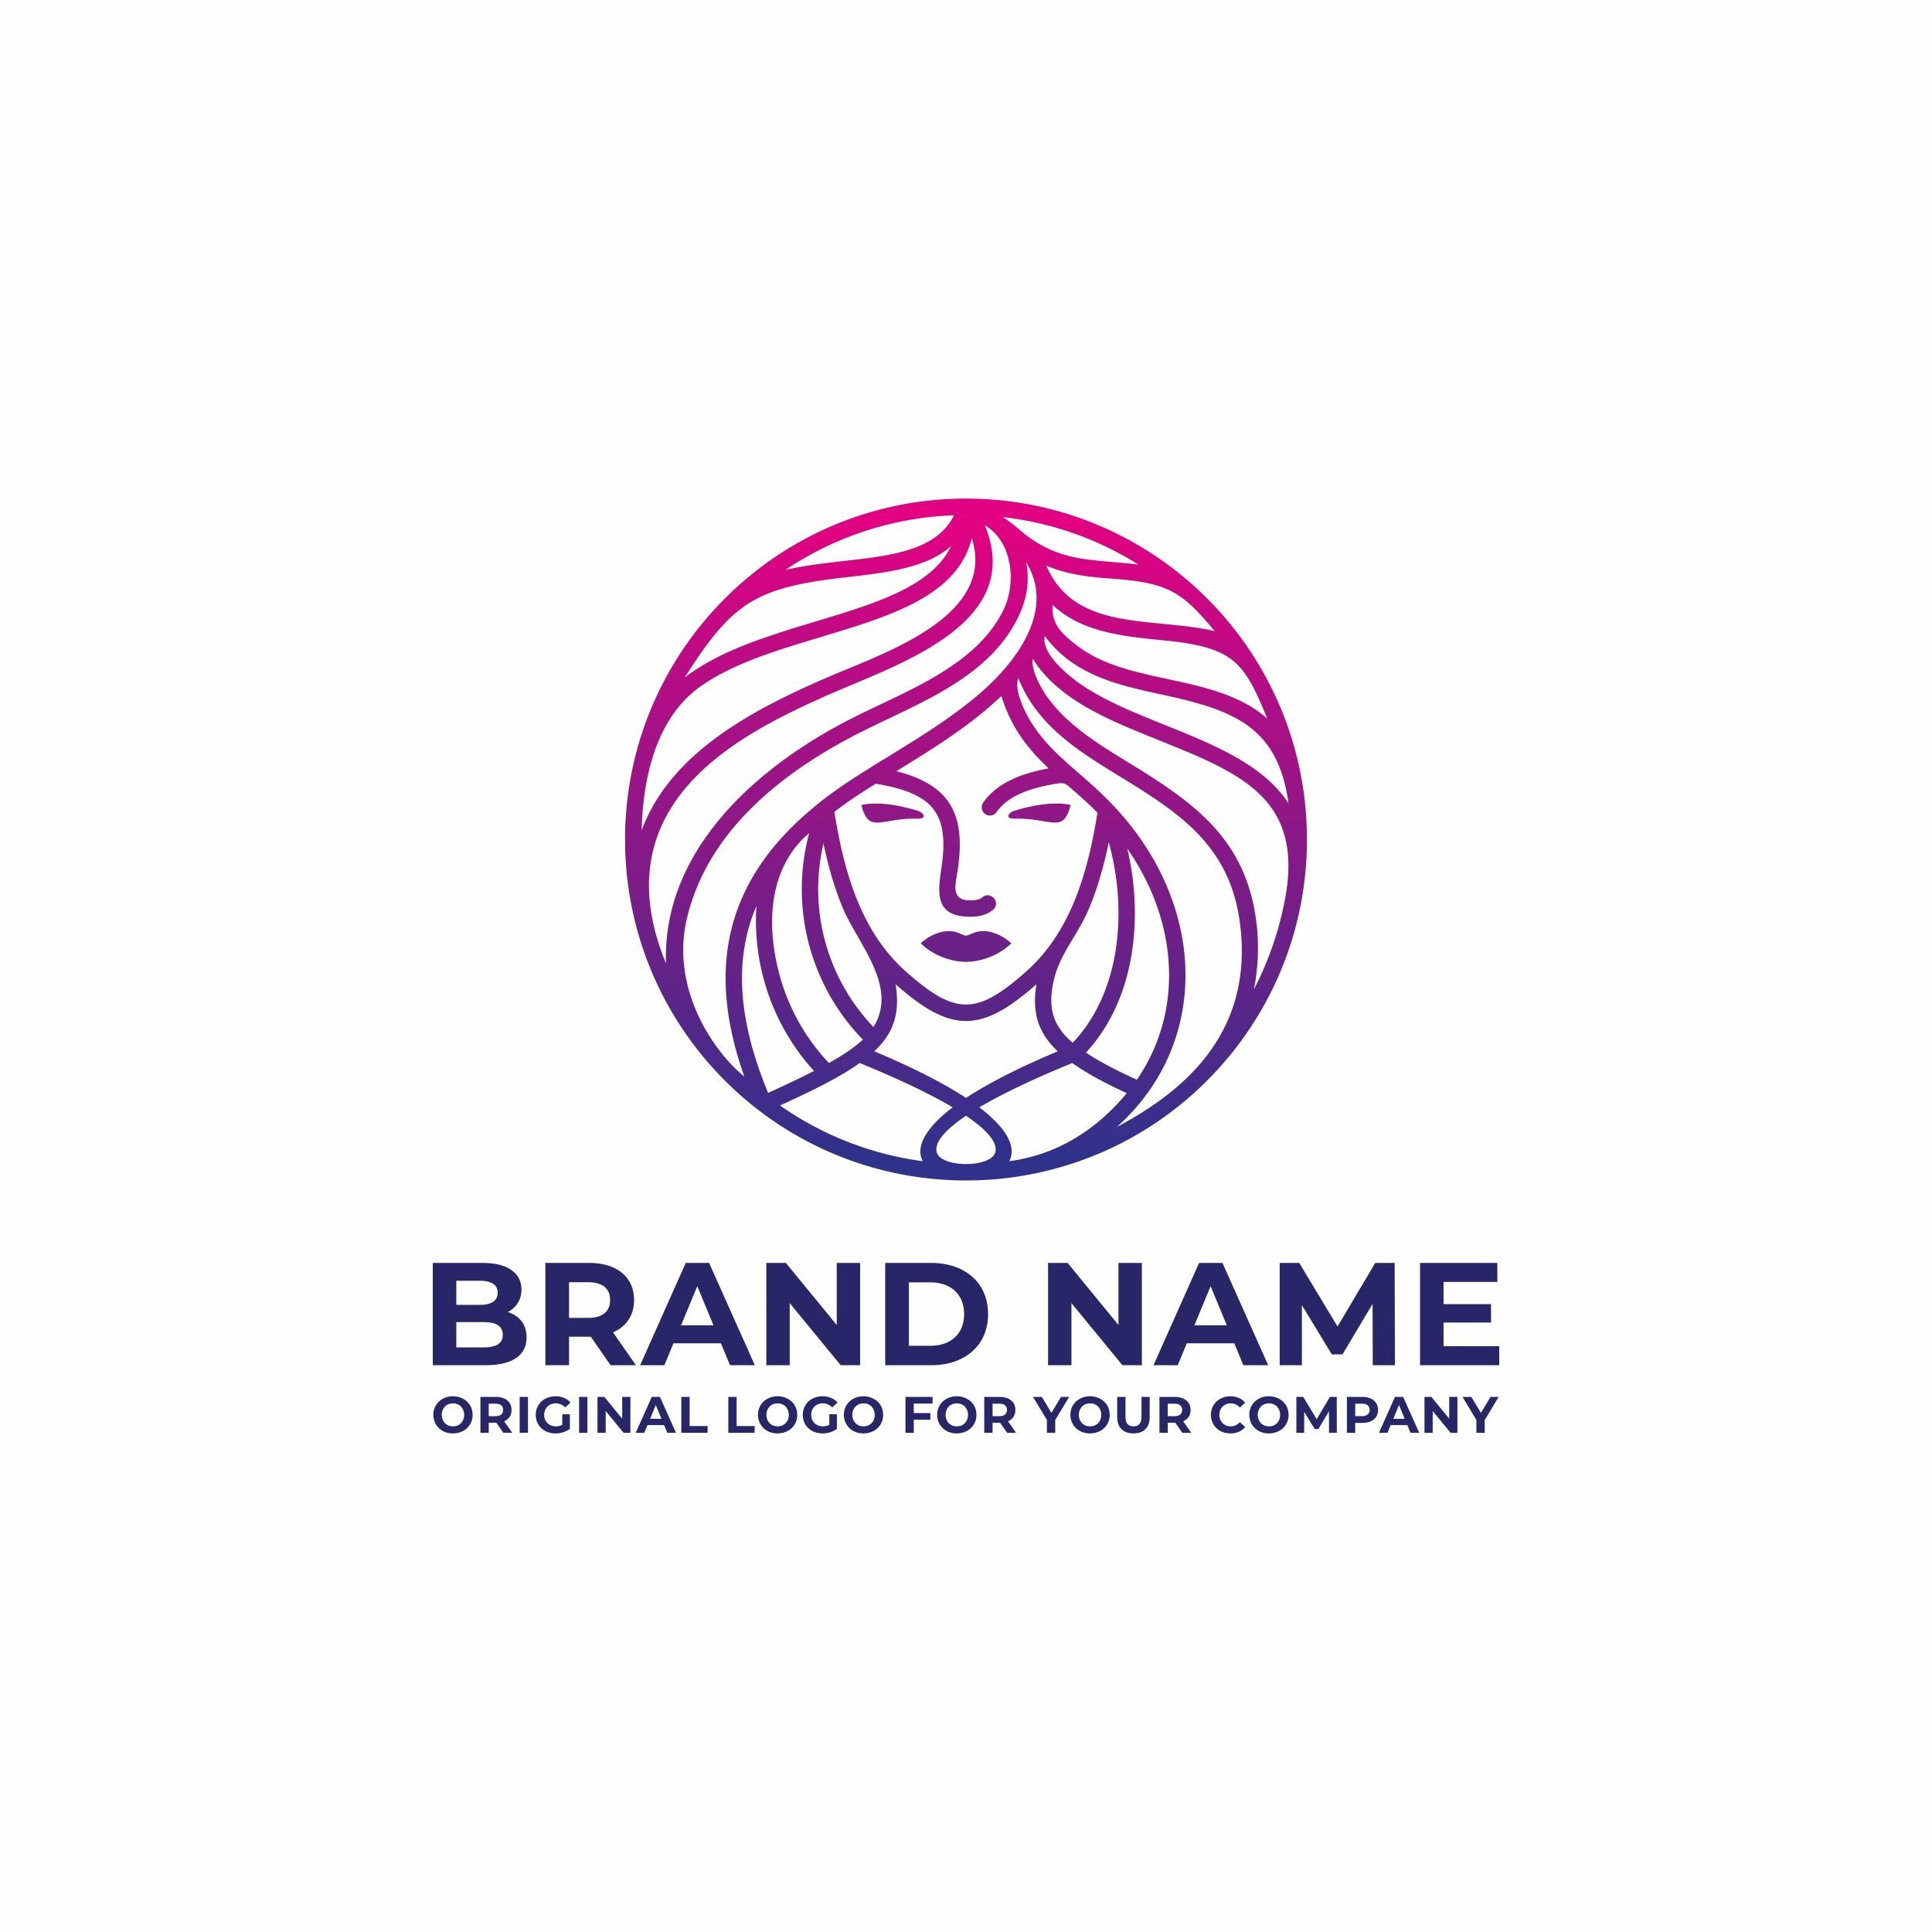 Woman Logo Design Can Be Used Stock Vector (Royalty Free) 1485032858 - Woman Logo Design Can Be Used Stock Vector (Royalty Free) 1485032858 -   14 beauty Logo symbols ideas